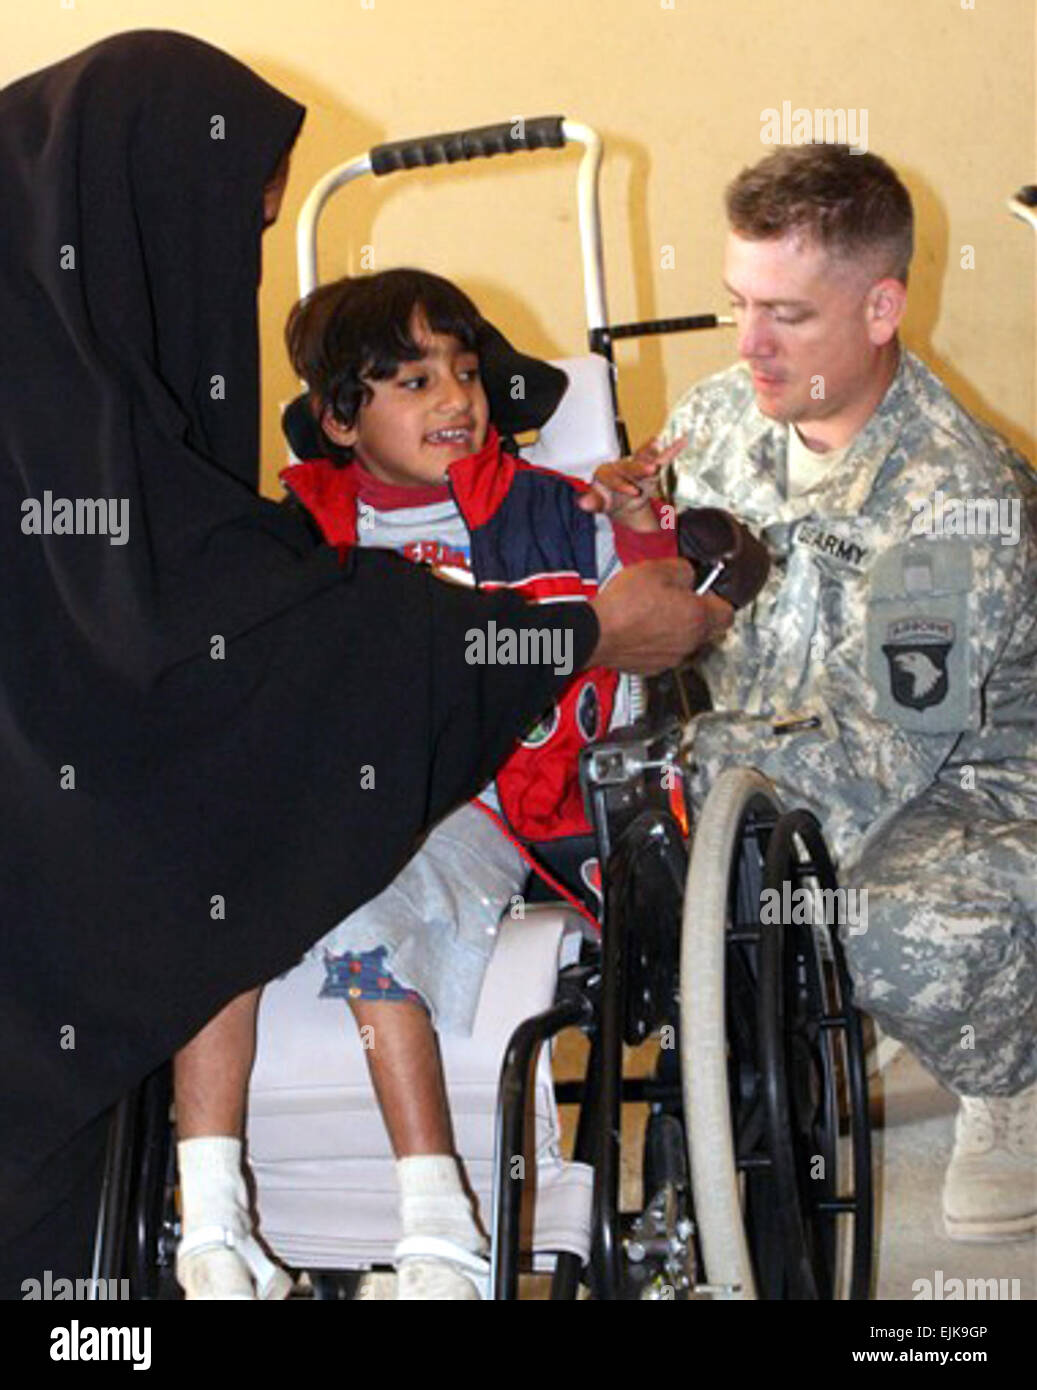 Army Sgt. Lonnie Todero, a medic with 1st Squadron, 33rd Cavalry, 3rd Brigade Combat Team, 101st Airborne Division Air Assault, makes adjustments to Zeanib Saad Al Amary's wheelchair Dec. 13, 2007, at Radwaniyah Palace Complex Civil-Military Operations Center in Iraq.  Sgt. 1st Class Kerensa Hardy, USA Stock Photo